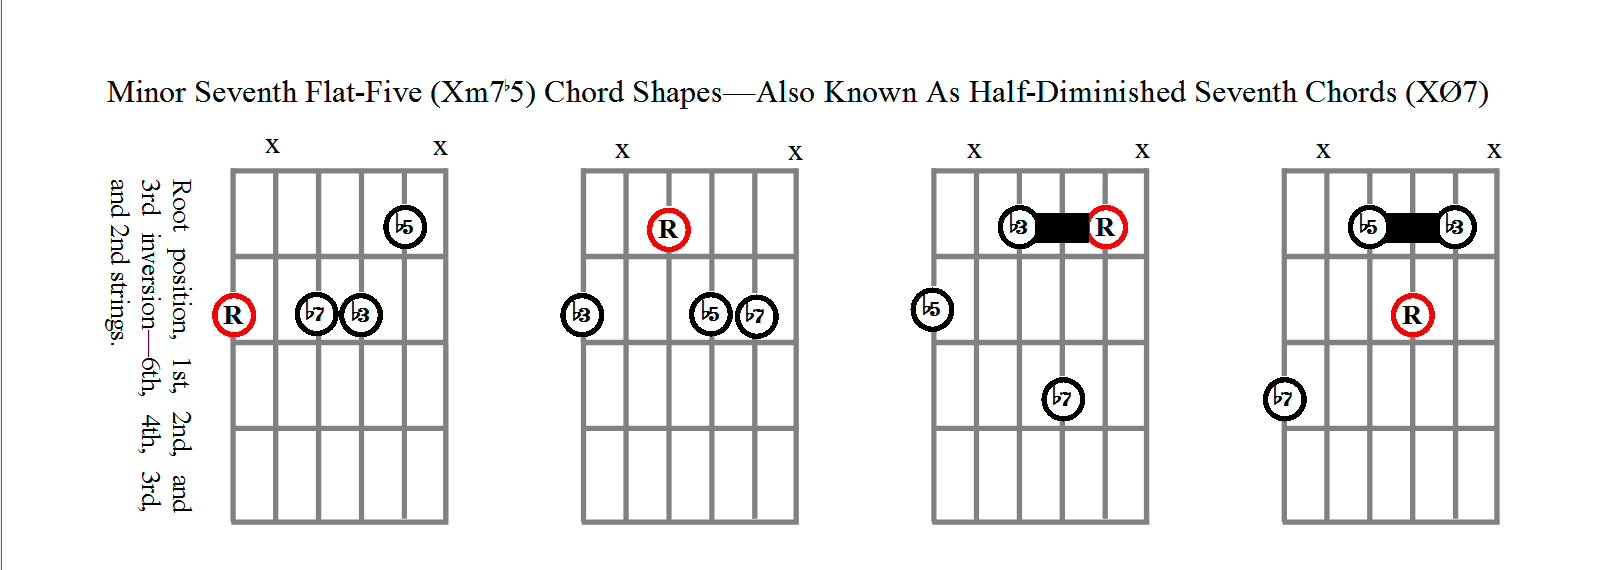 Minor Seventh Flat-Five Chord Shapes Using Strings 6,4,3,and 2